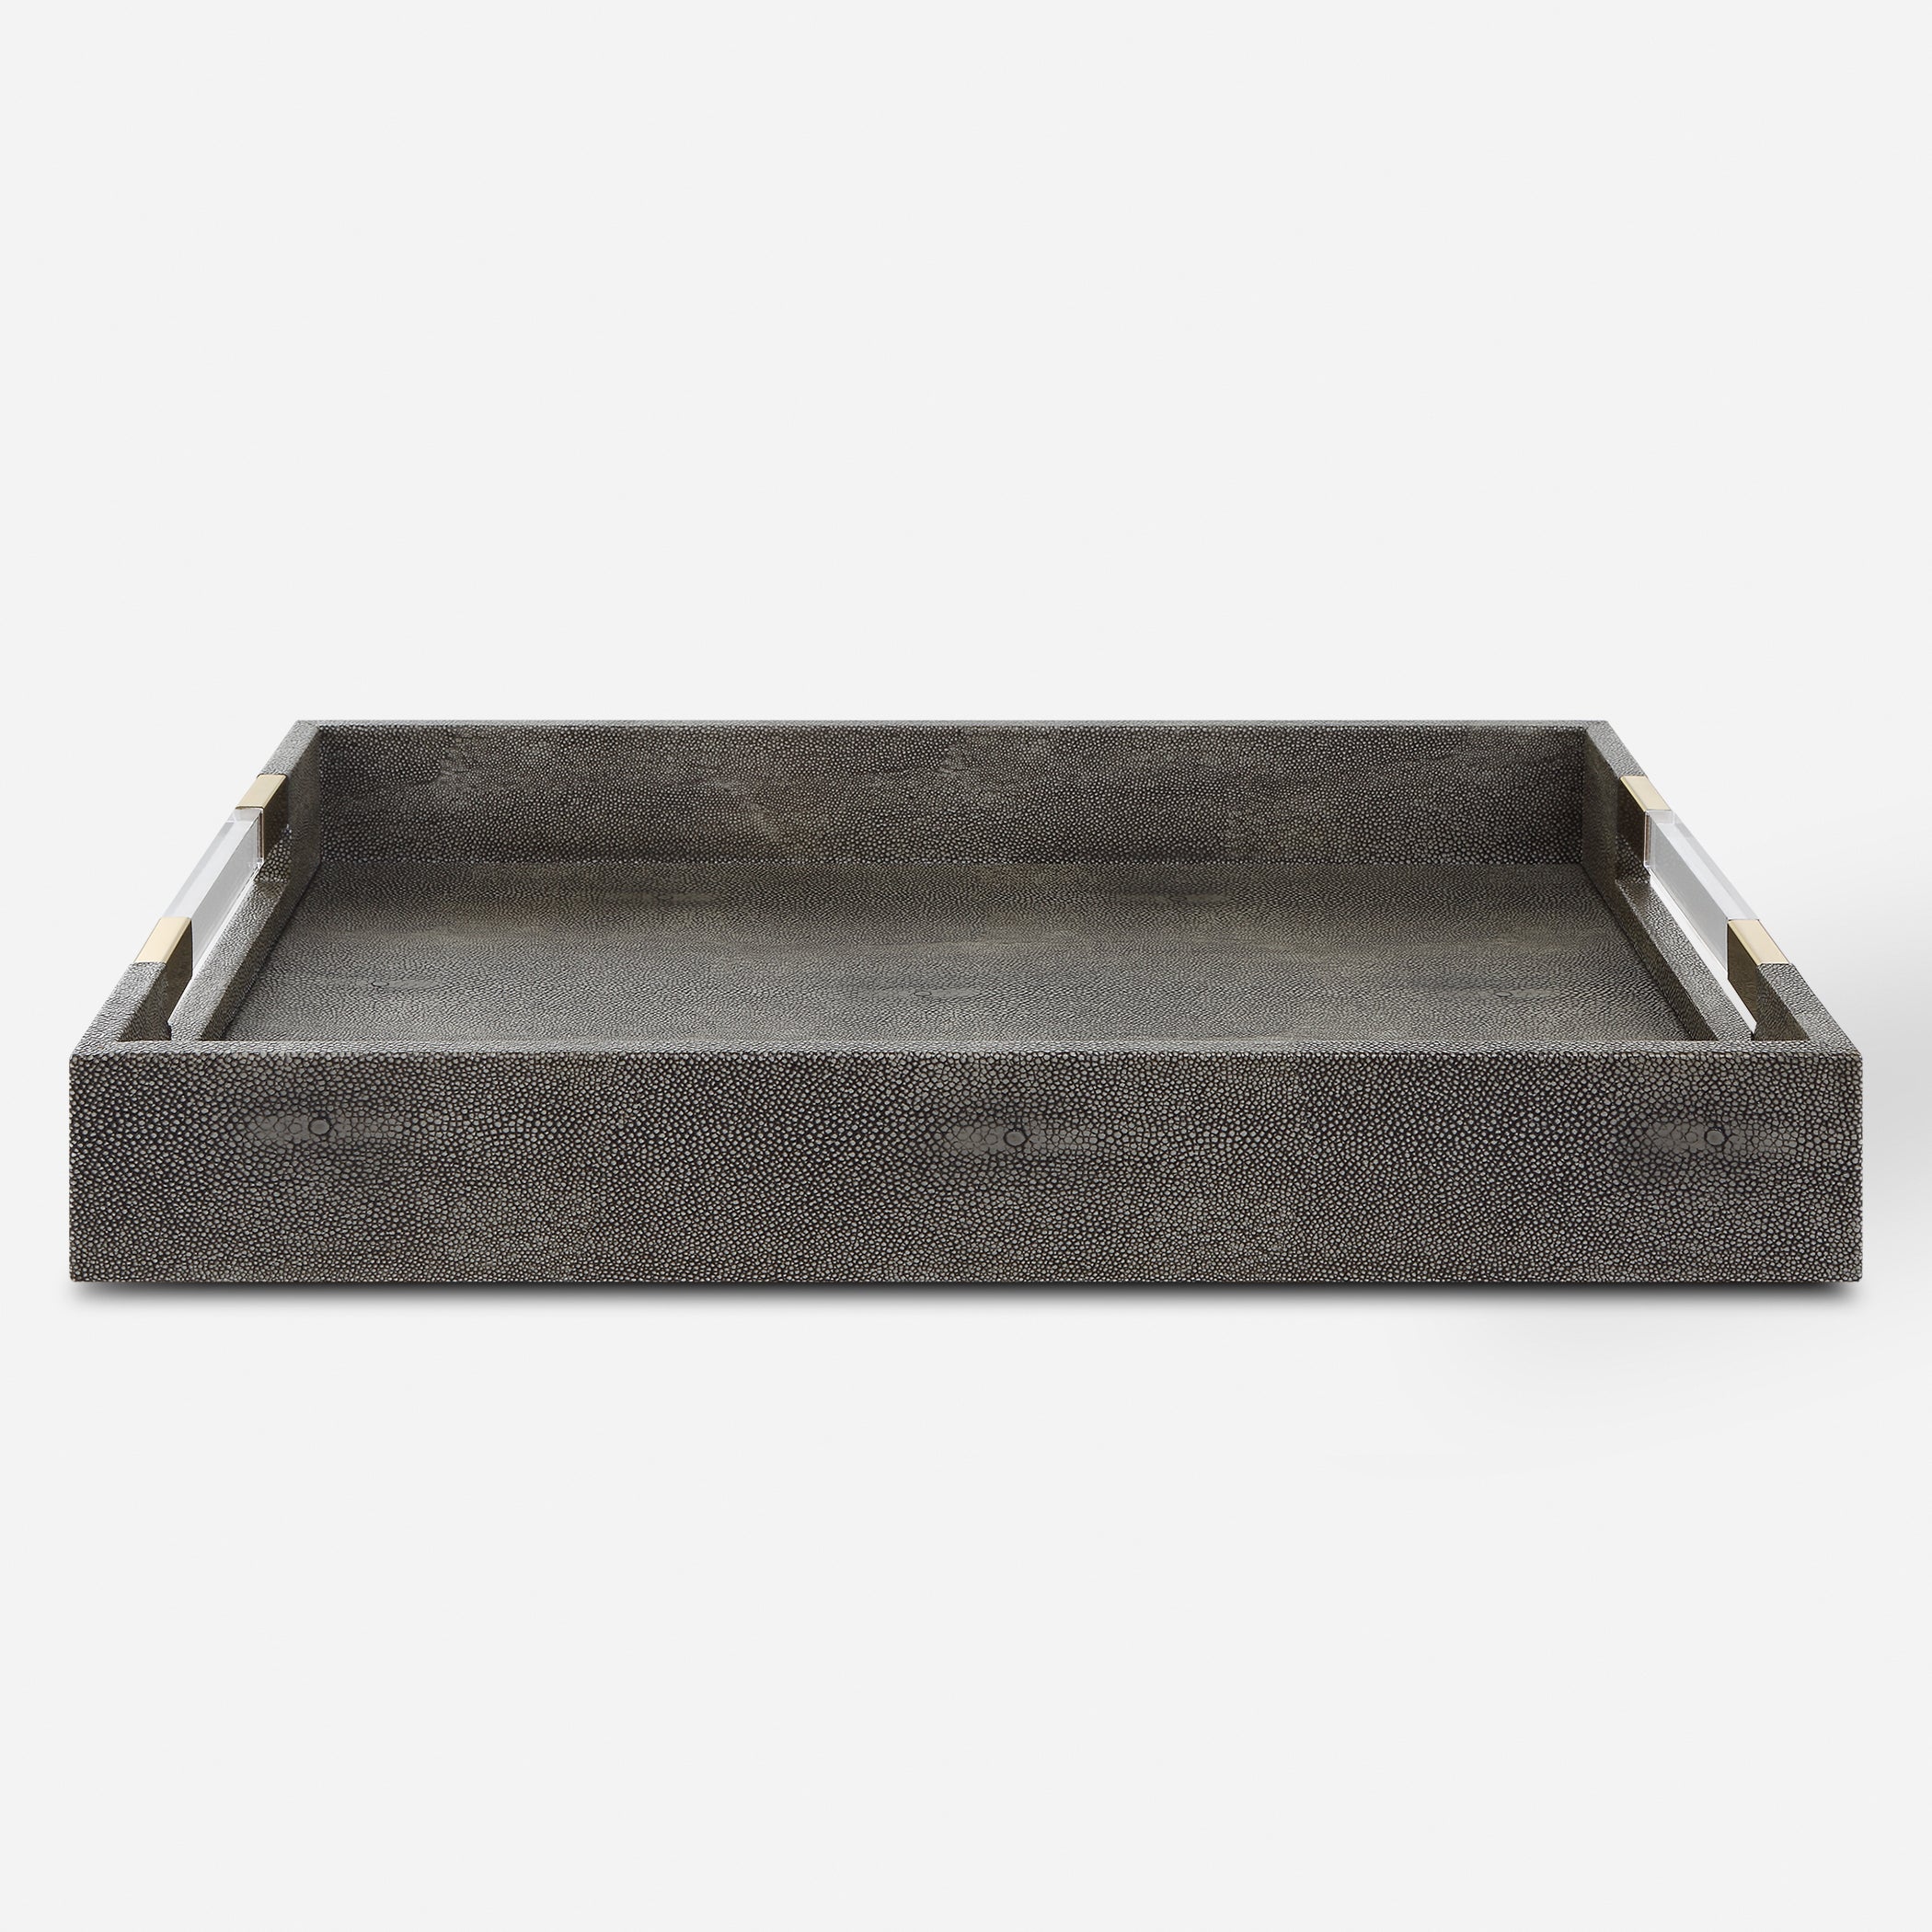 Uttermost Wessex Trays Trays Uttermost   